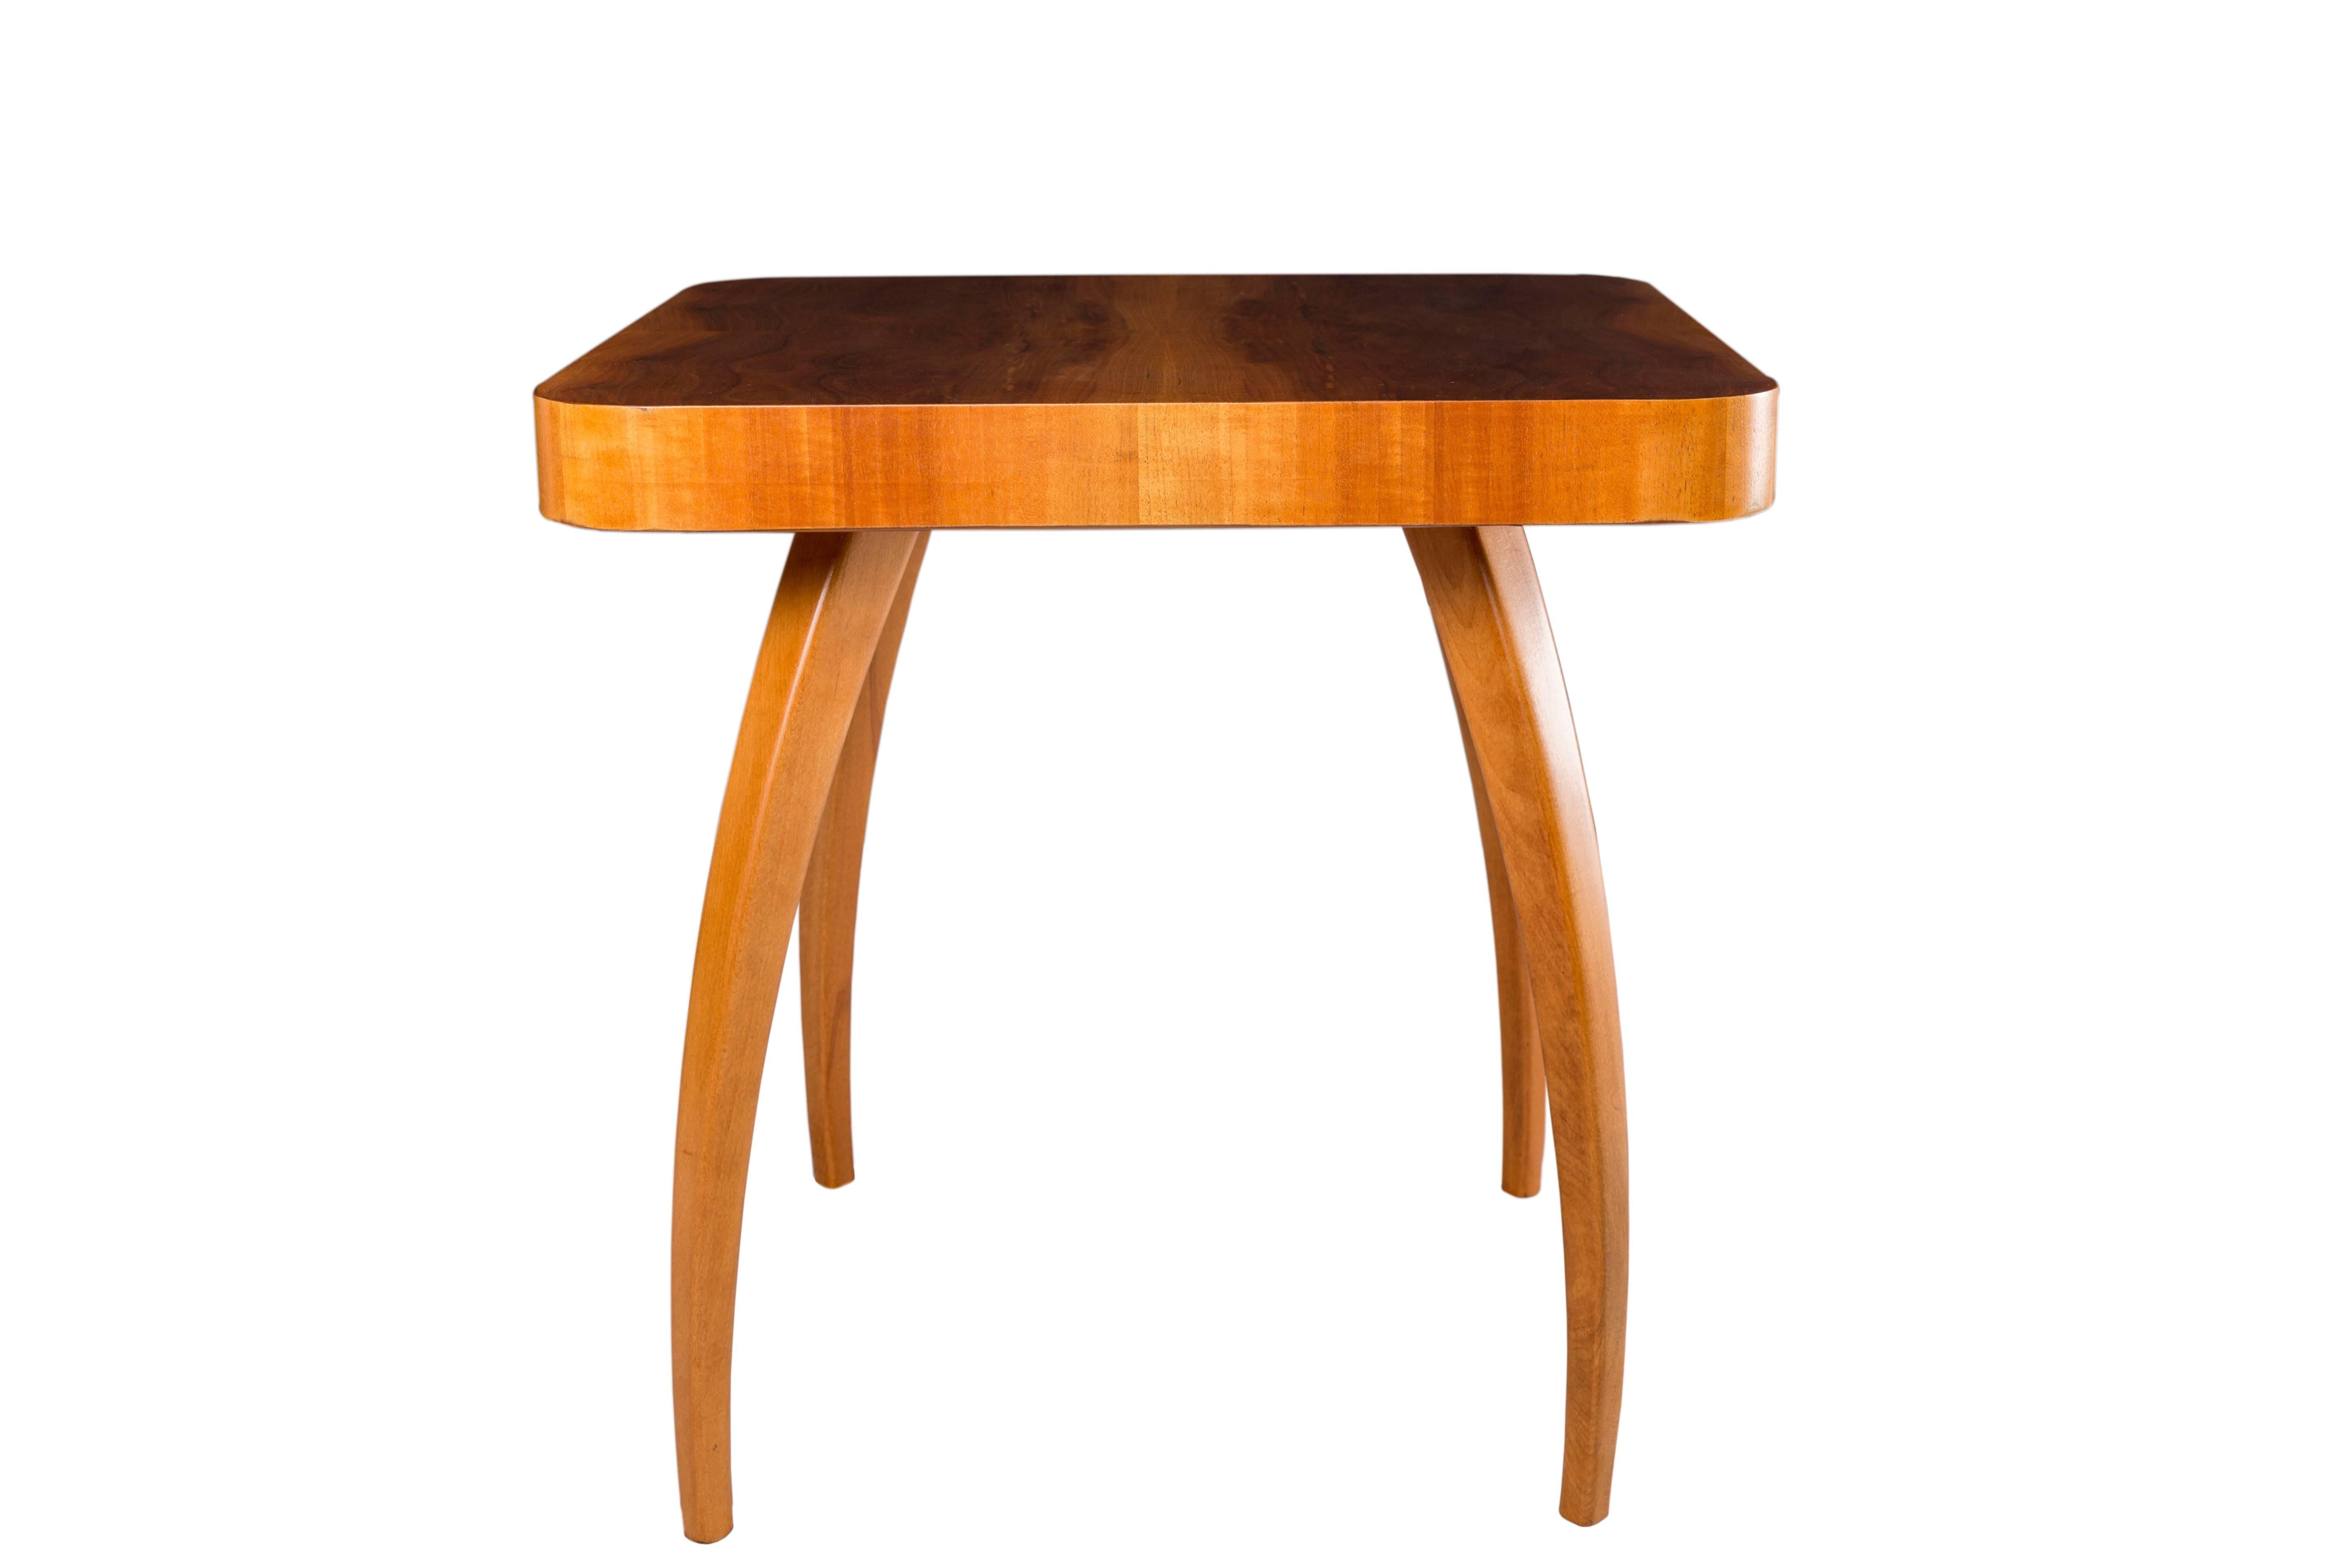 Designed by Jindrich Halabala in the 1940s this coffee table was popularly called the Spider because of its shape. The walnut veneer is restored with handmade french polish. Very elegant model. Can be used as an end table as well.
J. Halabala